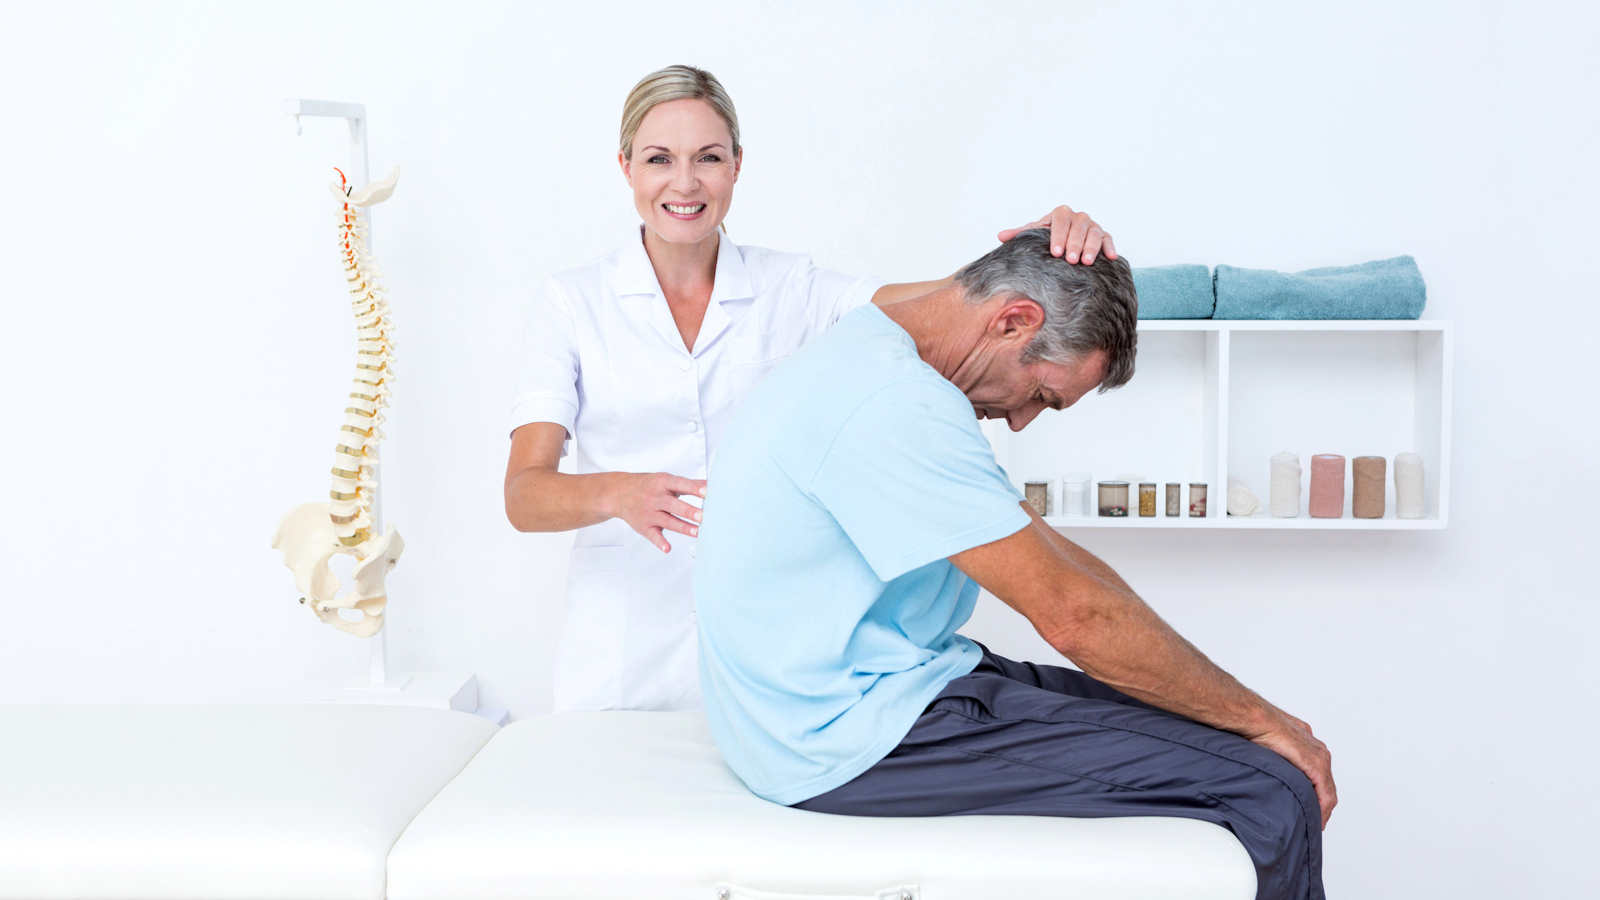 Gold Chiropractic Clinic of Pharr